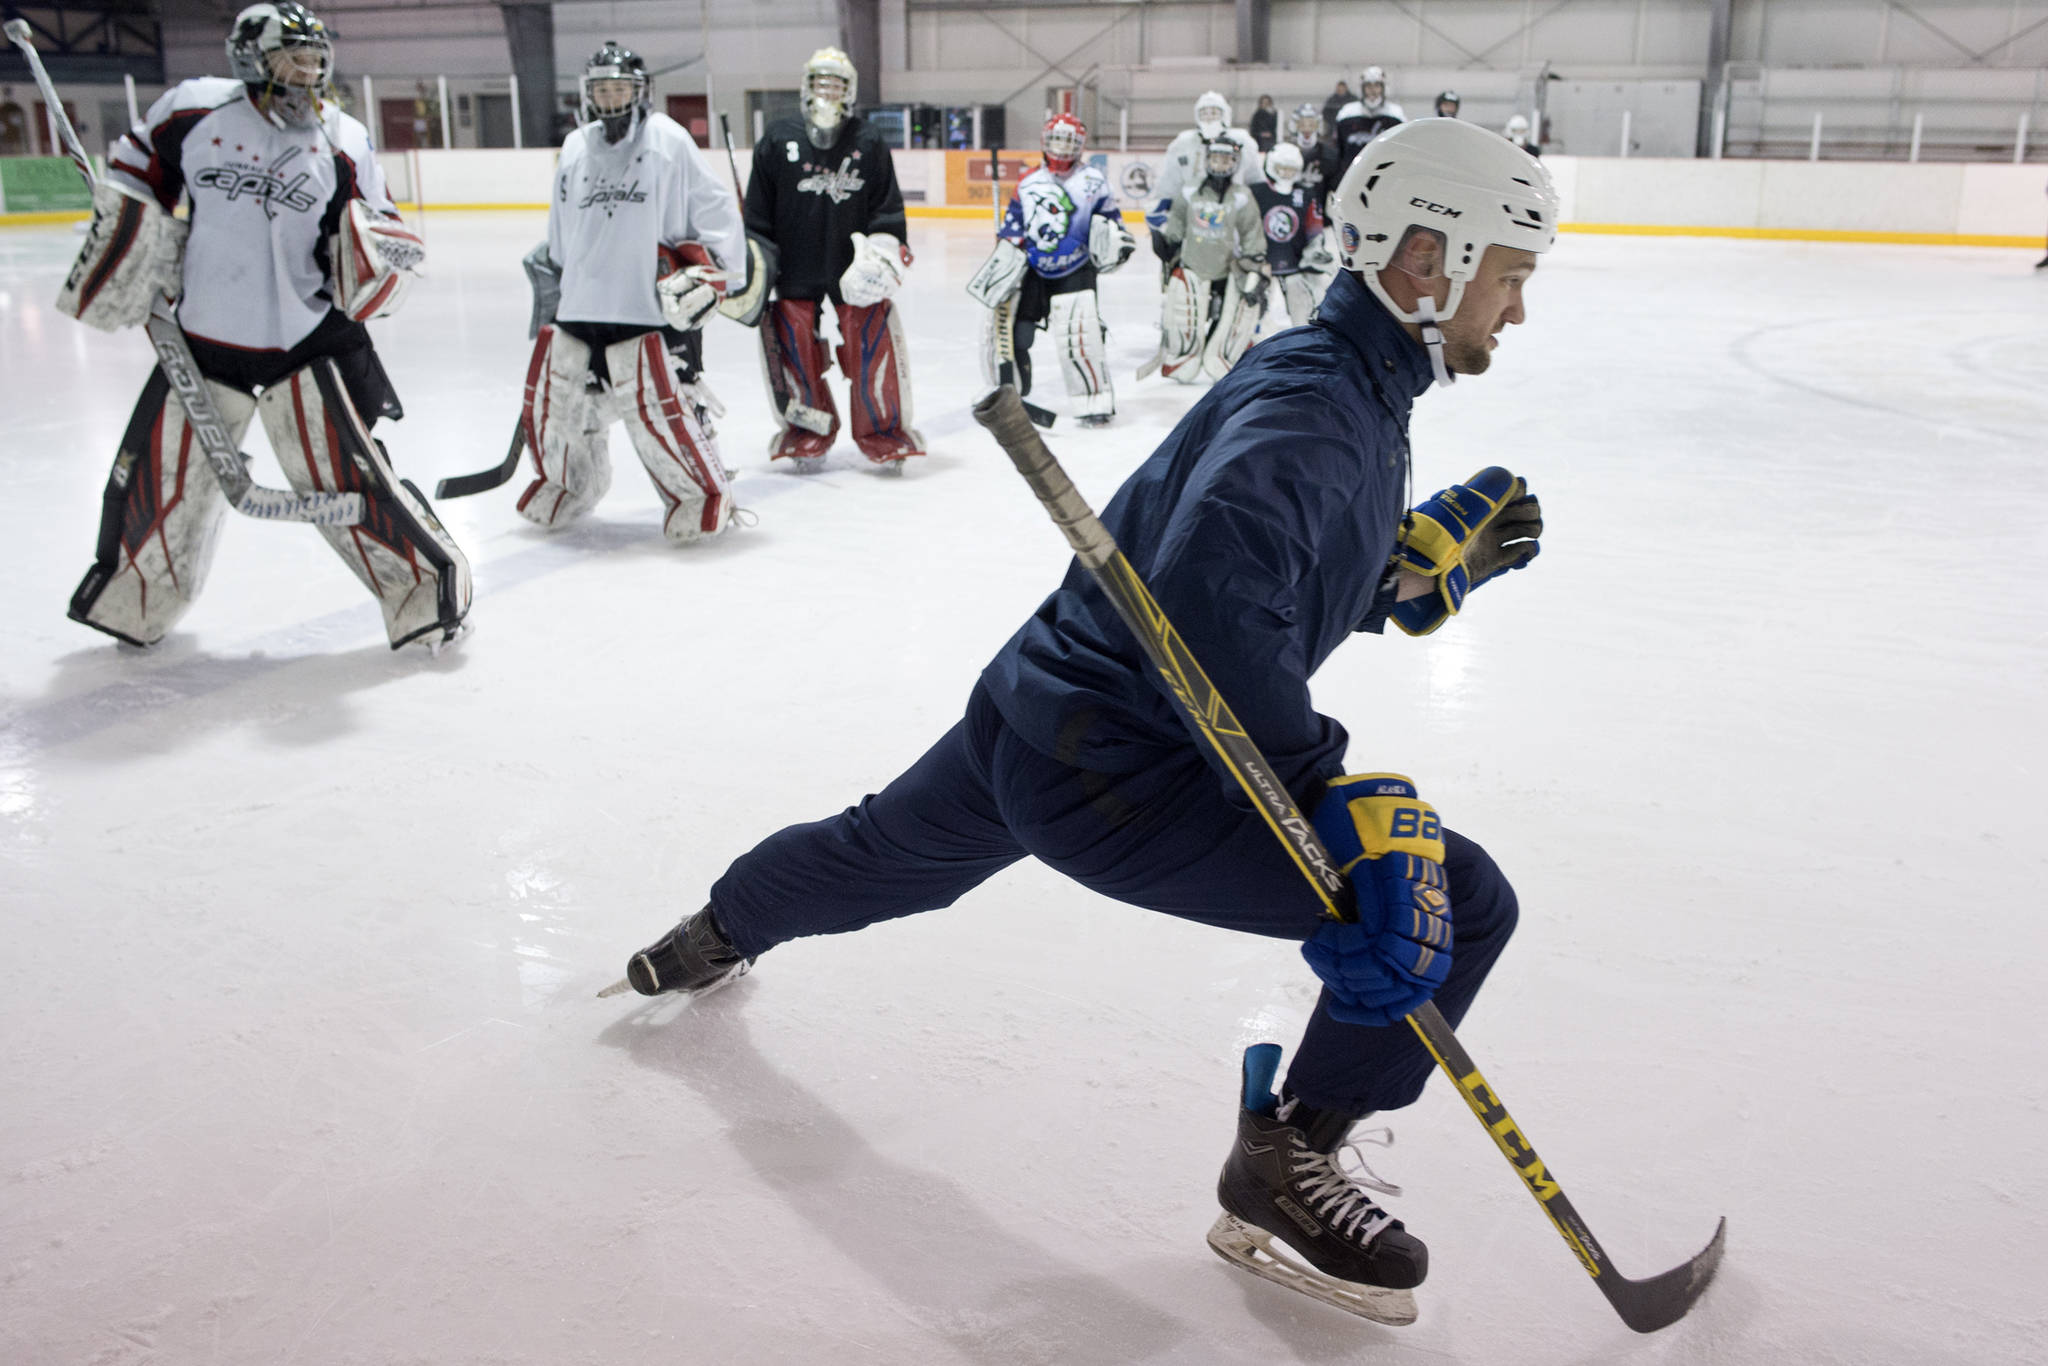 Steve Thompson, of Alaska Goaltending Academy, leads a drill for goaltenders at Treadwell Arena in February 2017. Thompson is celebrating the “Try Hockey Day” on Saturday with a free goalie clinic on Mendenhall Lake. (Michael Penn | Juneau Empire File)